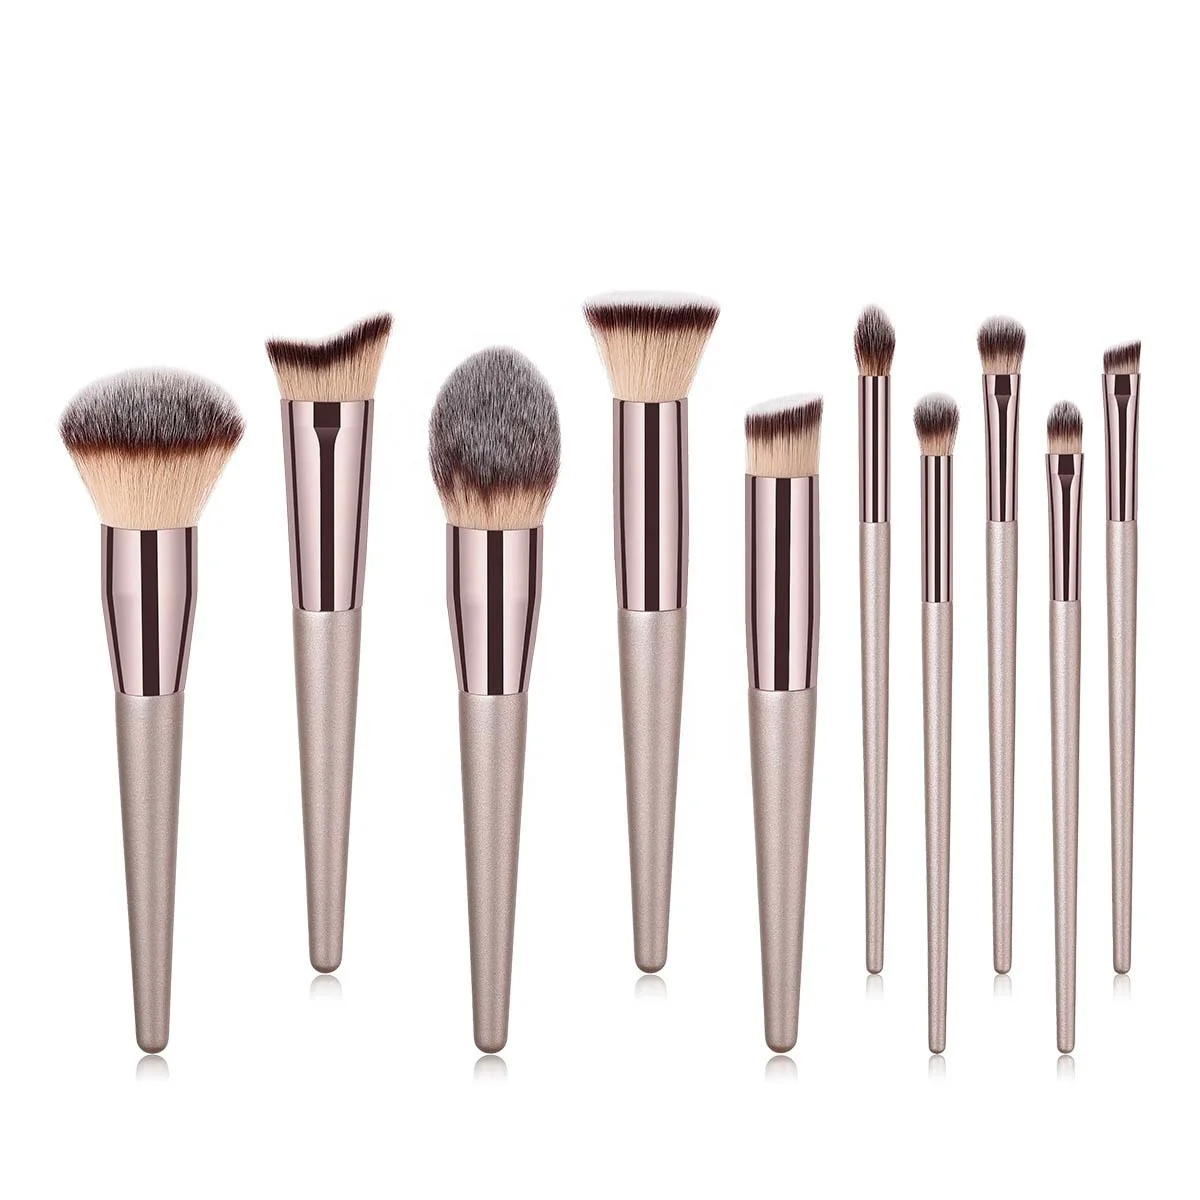 

Charm Beauty 20pcs Champagne Gold Brush Makeup Private Label Synthetic Cosmetic Brushes Foundation Eyeshadow Makeup Brush Set, Pink color makeup brush